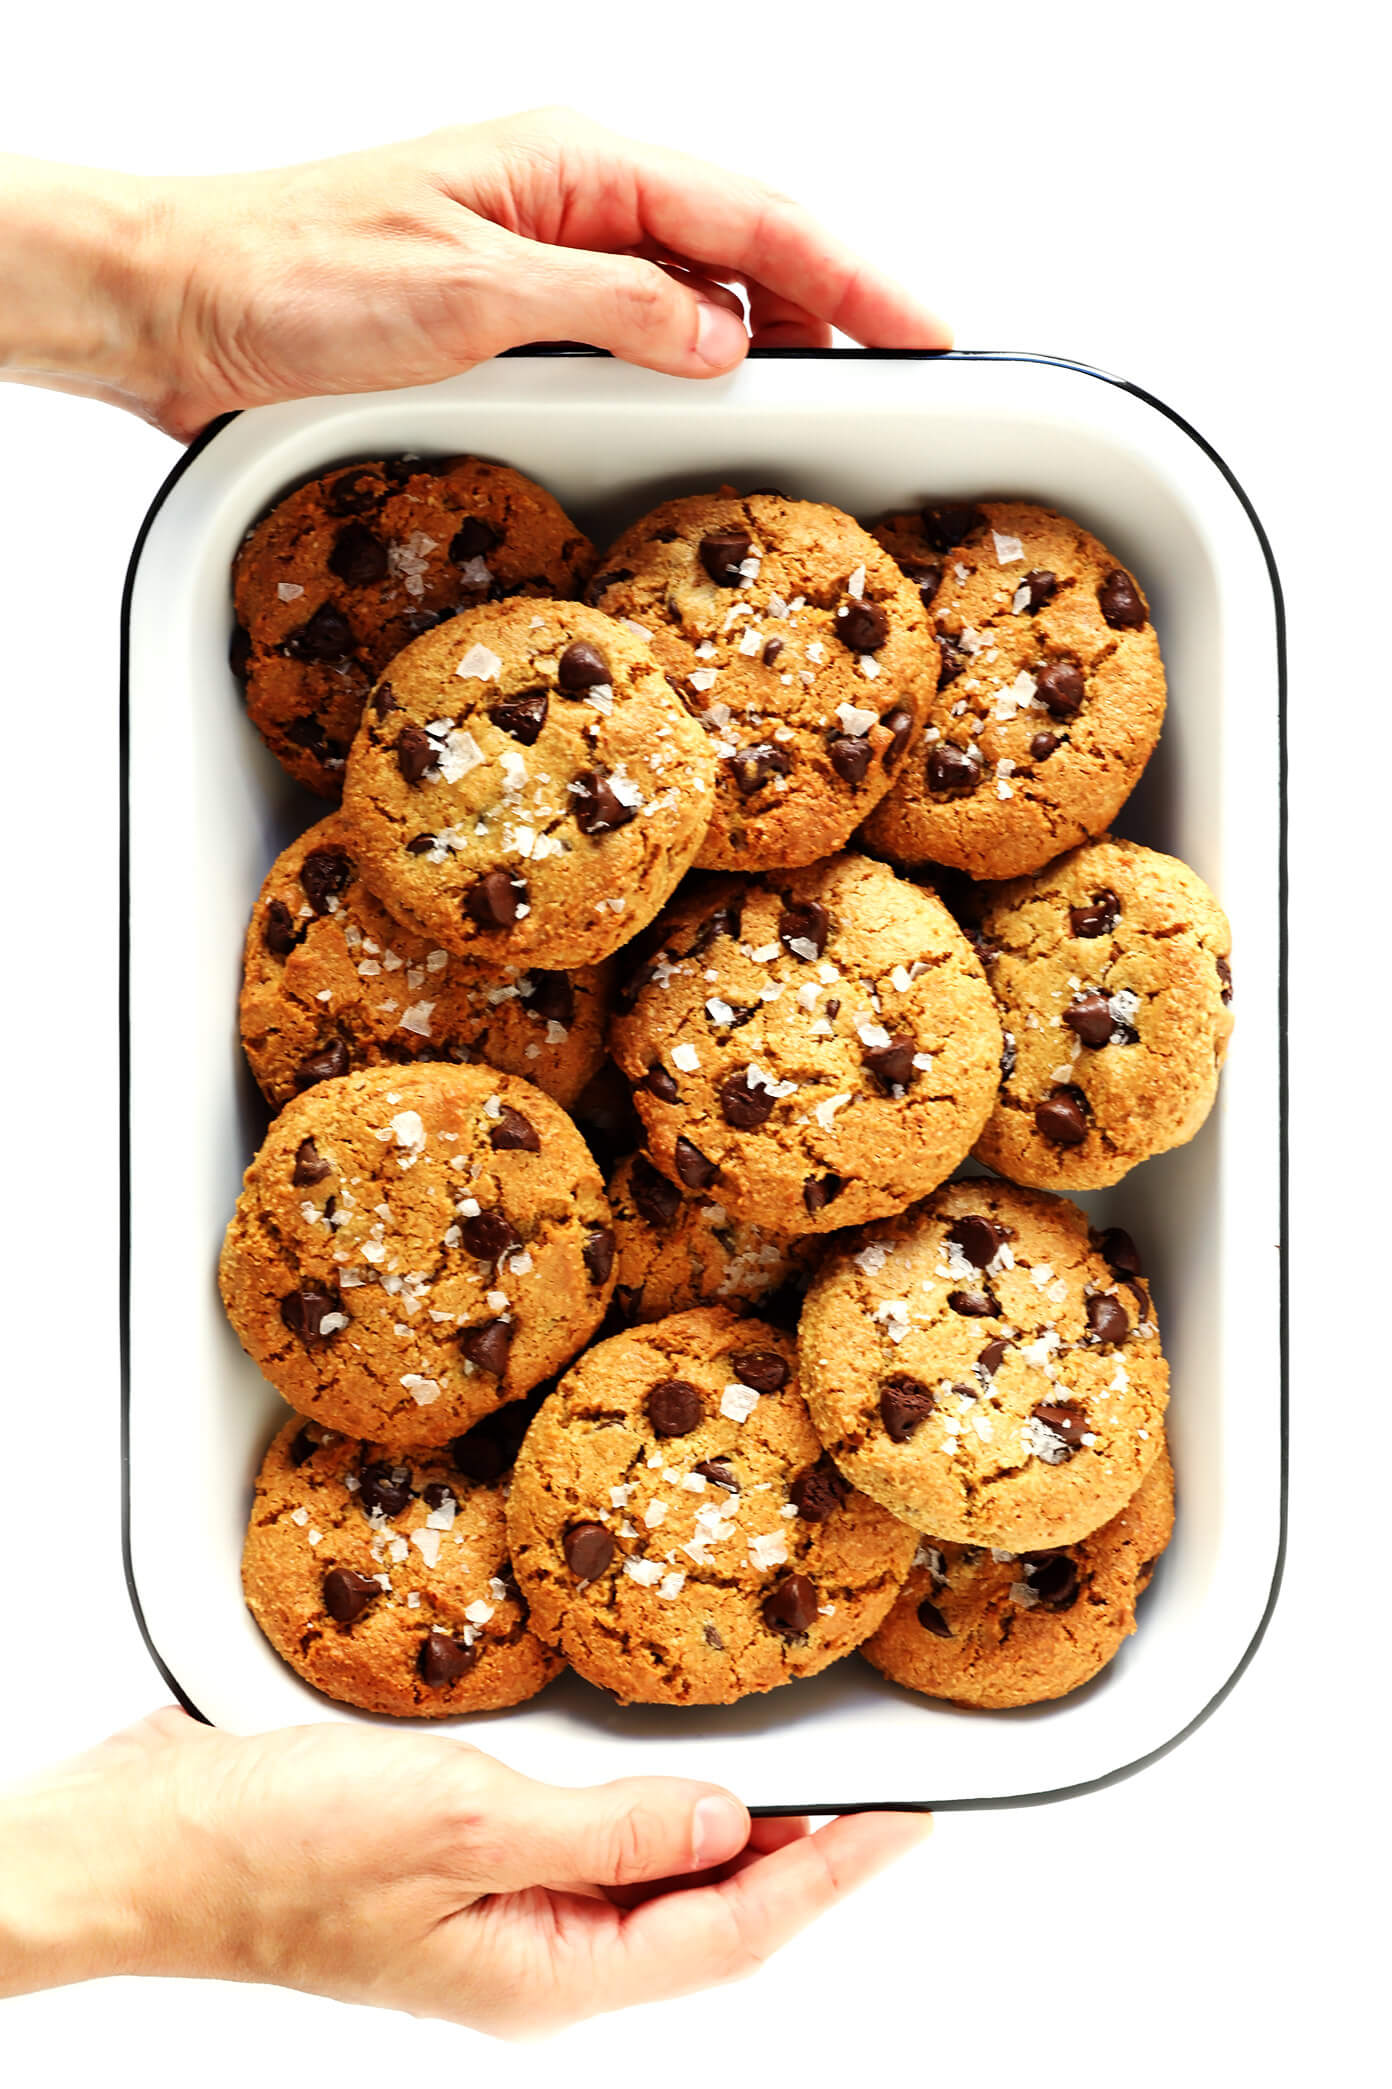 A chocolate chip cookie with ingredients